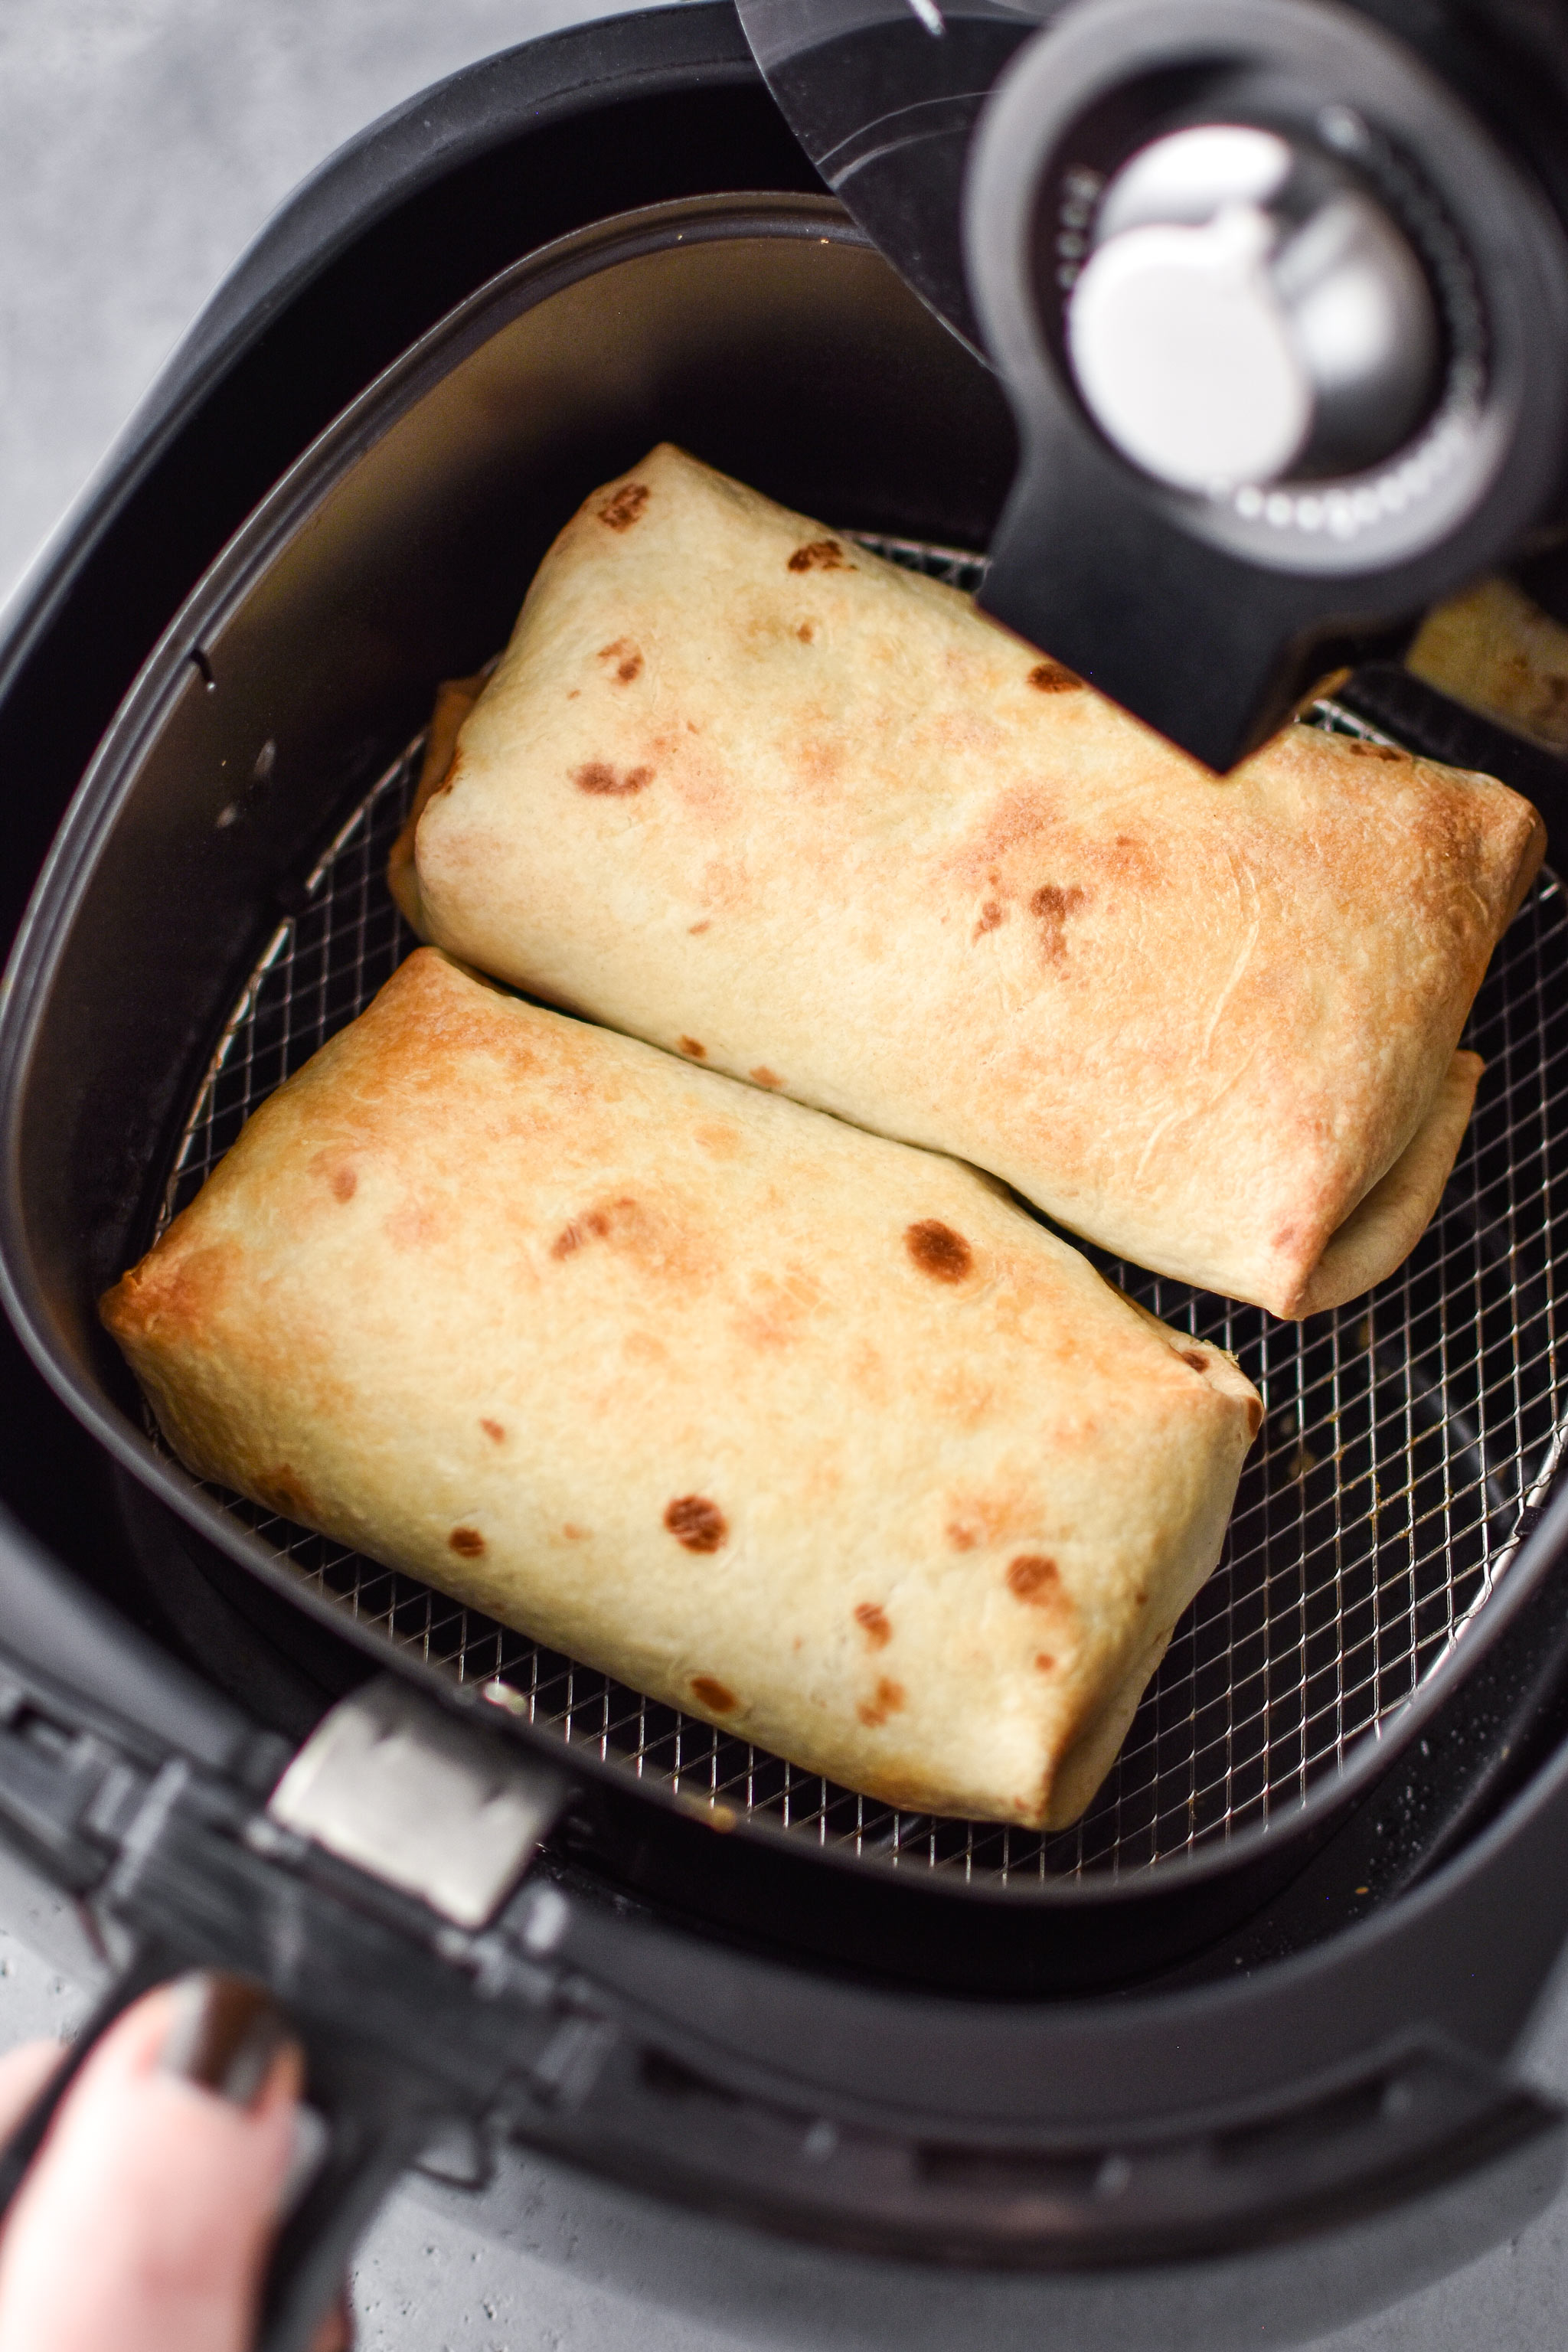 chimichangas fresh from the air fryer - how to make chimichangas in an air fryer